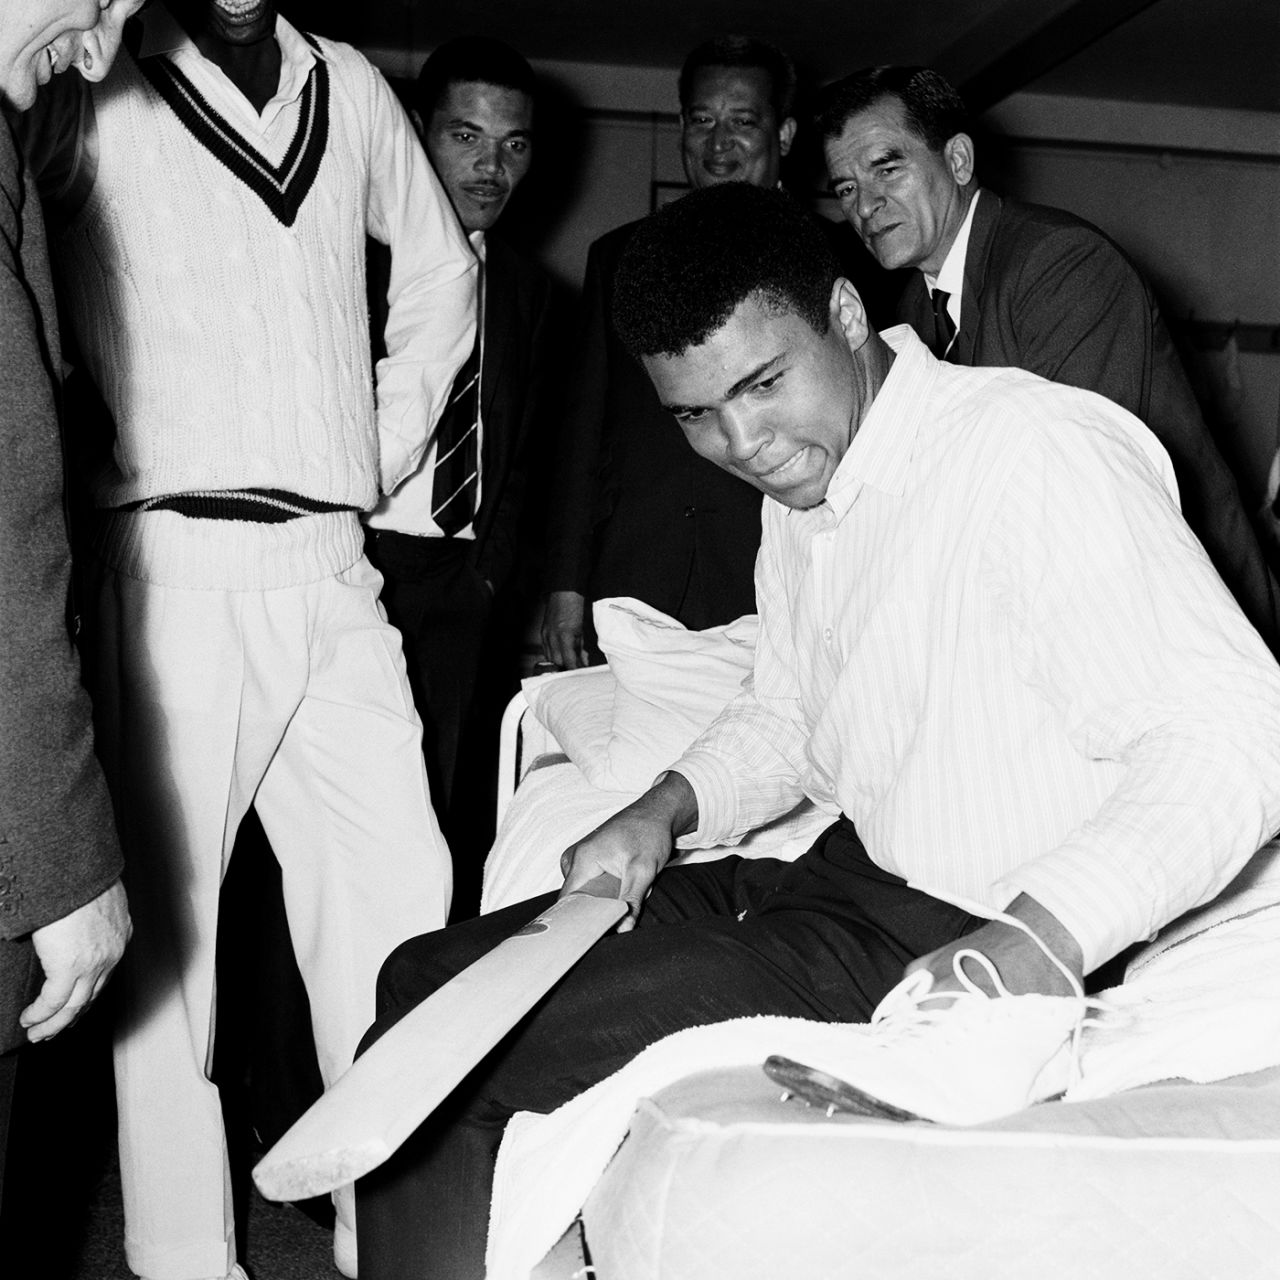 Muhammad Ali examines a cricket boot in the West Indies dressing room at Lord's, England v West Indies, Lord's, 1st day, June 16, 1966